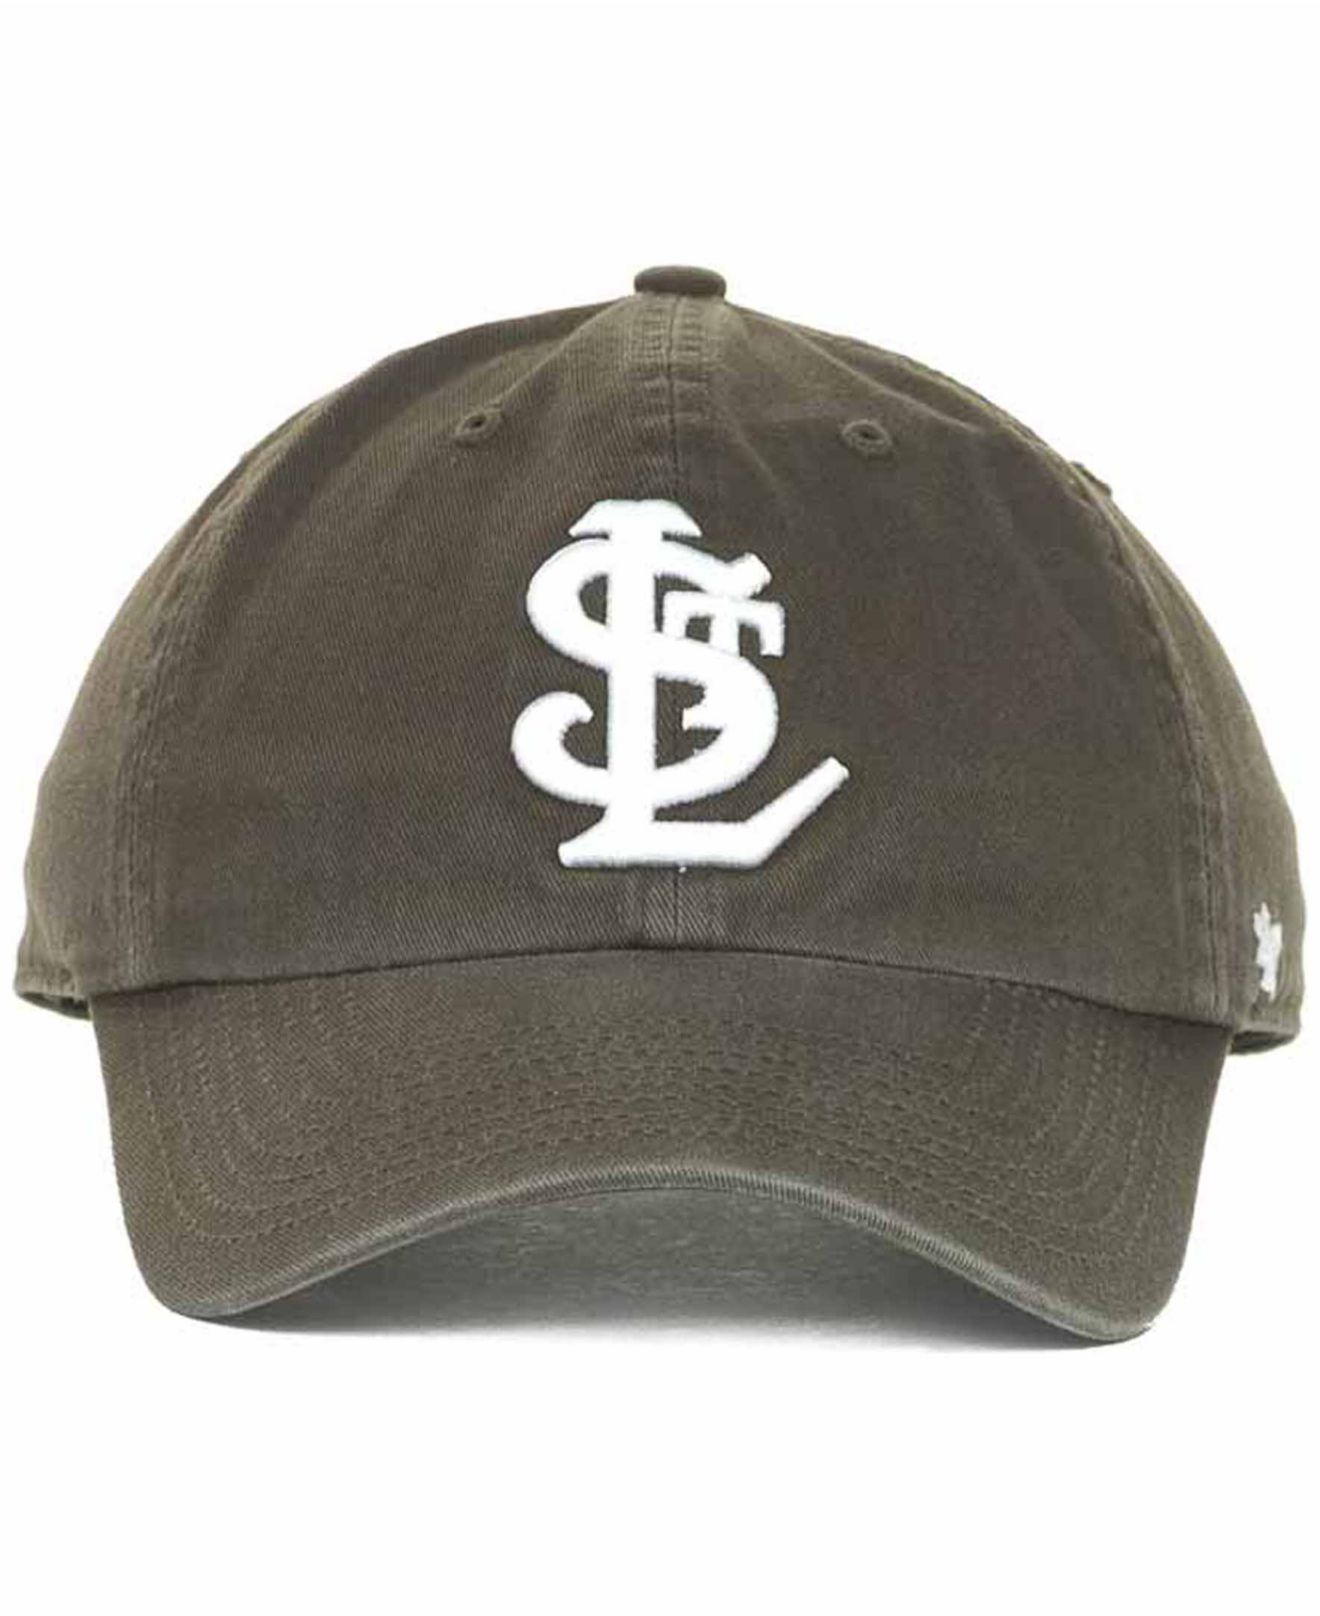 St. Louis Browns 47 Brand Cooperstown Natural Franchise Fitted Hat - Large